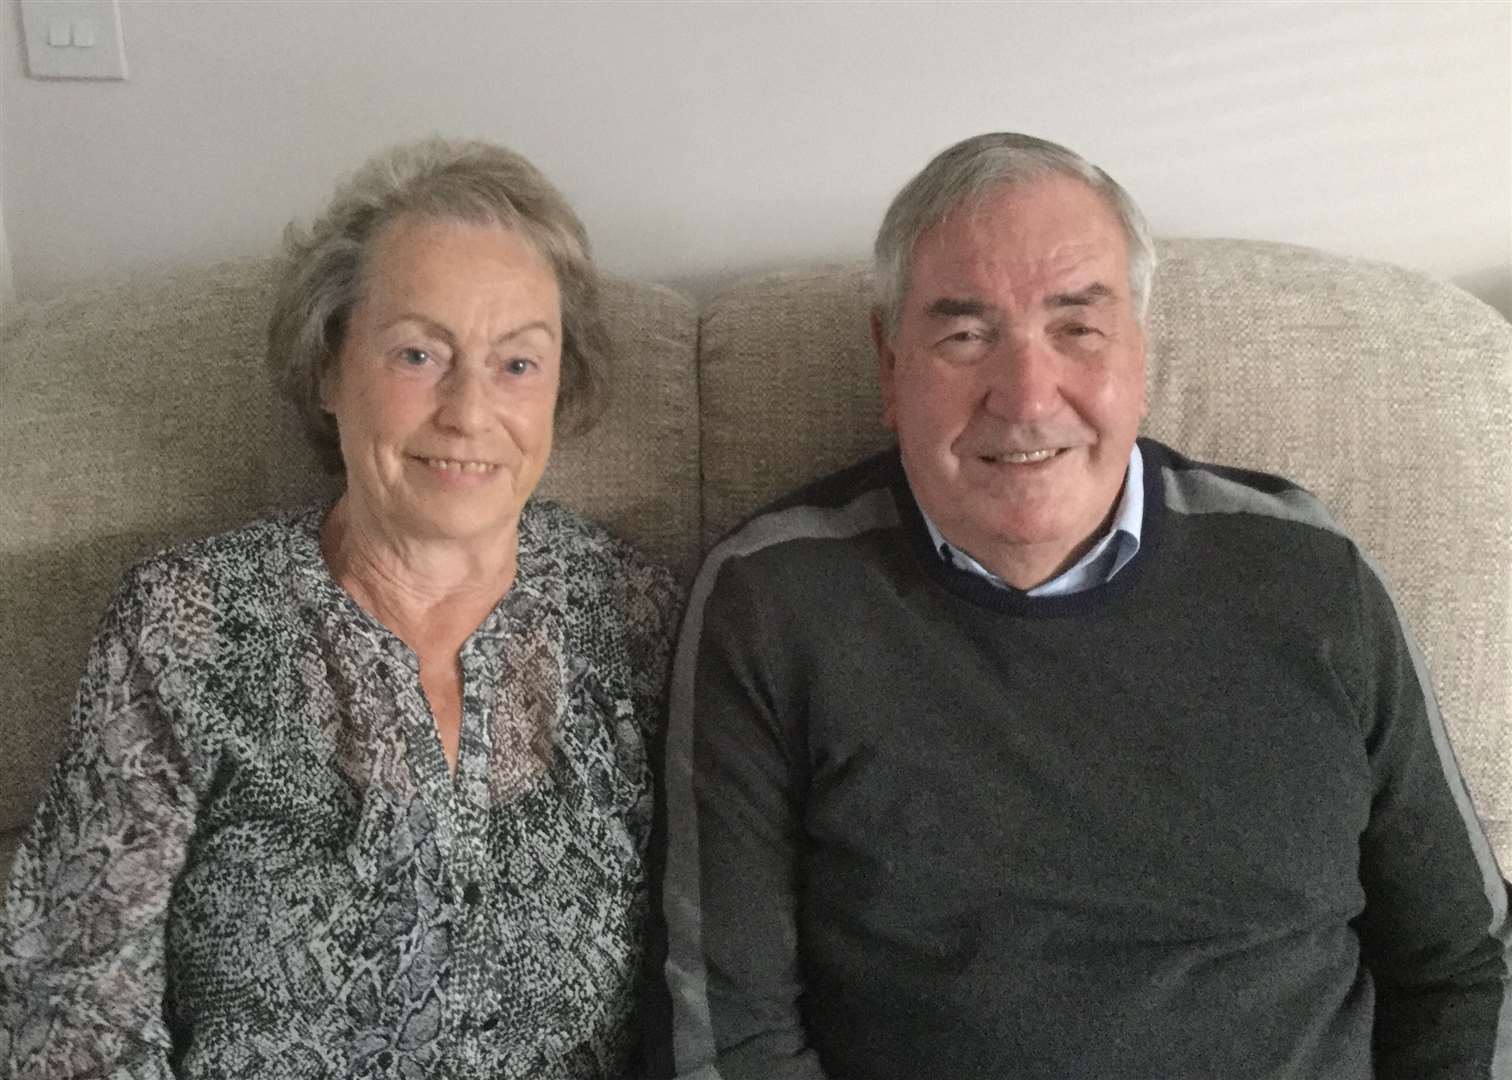 Sgt Leonard Shrubsall's son Richard and his wife Janice, from Iwade